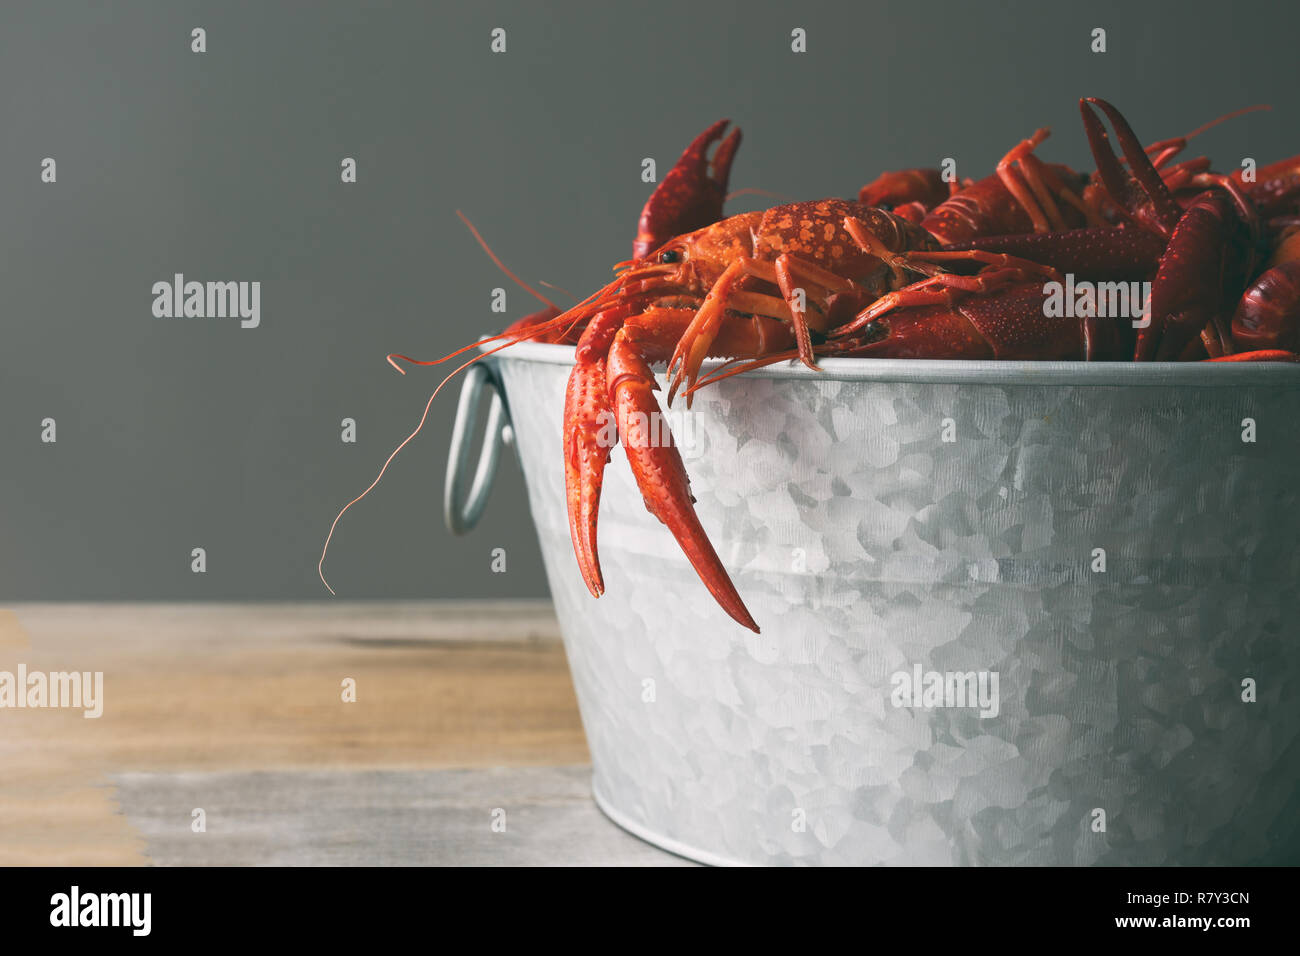 Steel bucket filled with boiled crayfish. Stock Photo